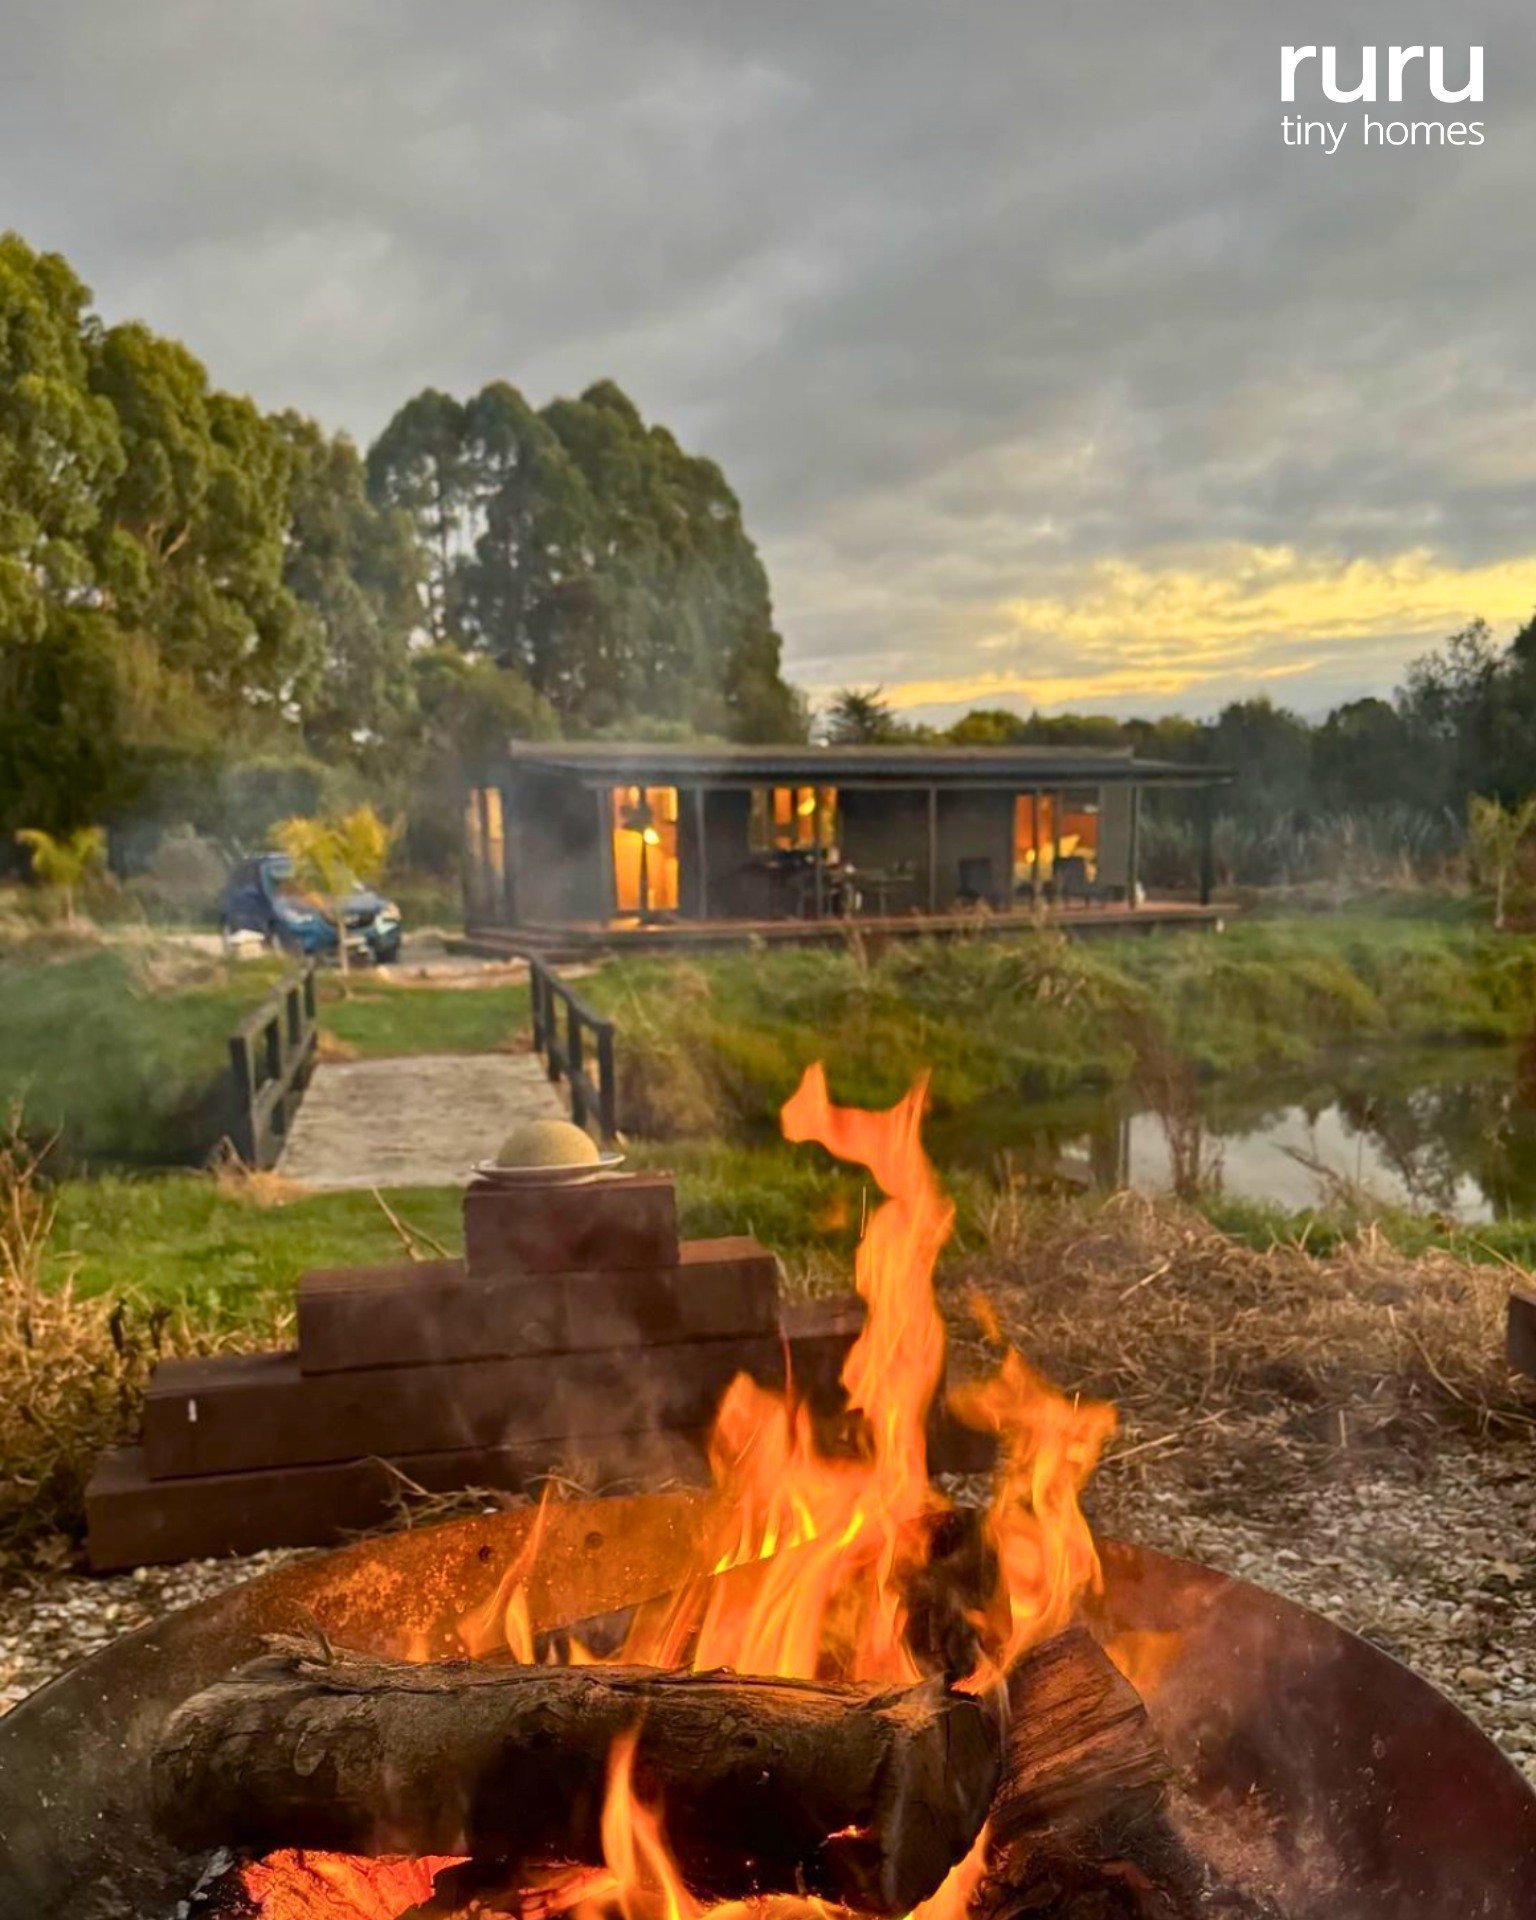 🍂 Our Little Ruru from @ruru_tiny_house_pohara  Airbnb 😍 They know how to enjoy an Autumnal evening by the fire pit! 🔥 Imagine savouring a warm soup and then snuggling up in bed after an incredible day in beautiful Pohara. How cosy the Little Ruru